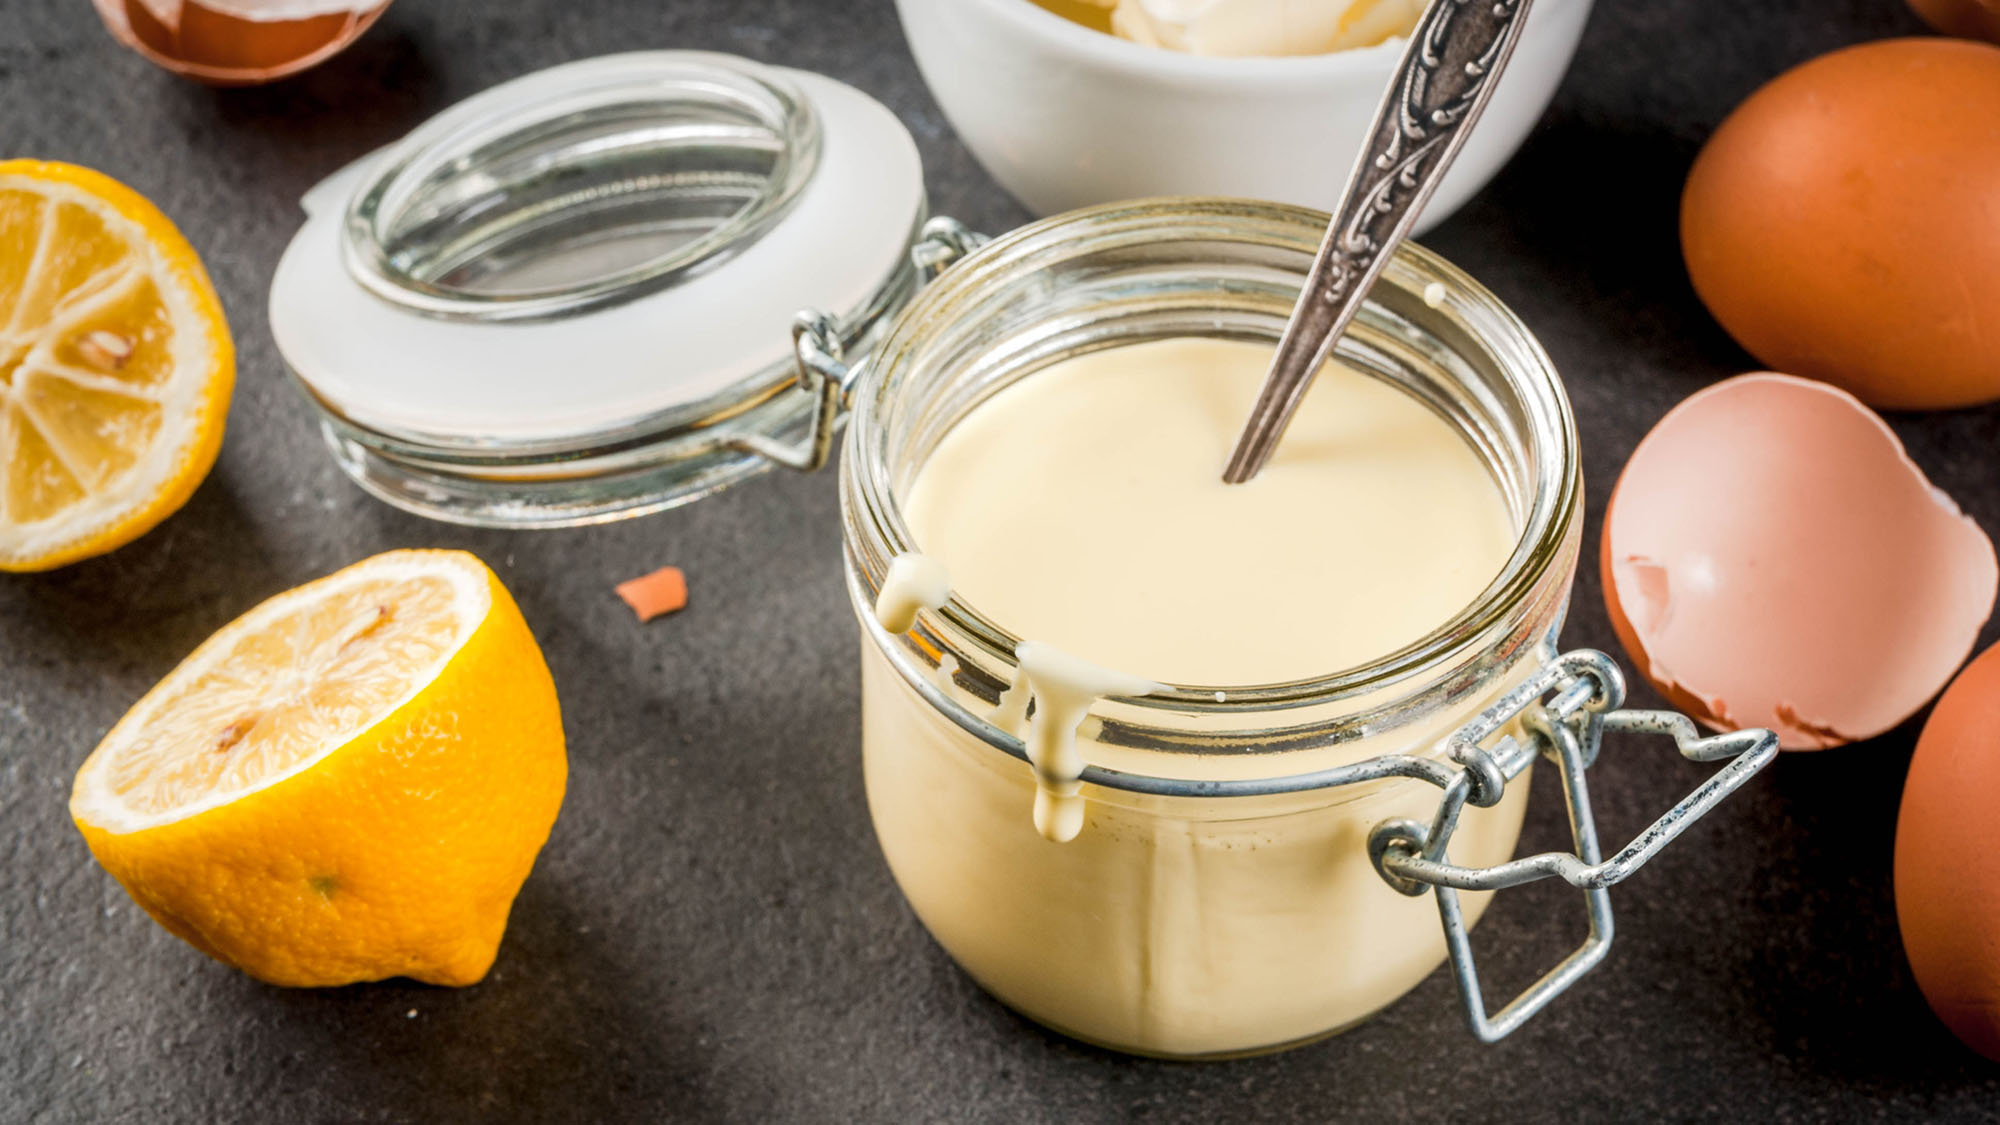 Hollandaise sauce in a glass serving jar, with ingredients like eggs and lemons around the jar on a black stone table.